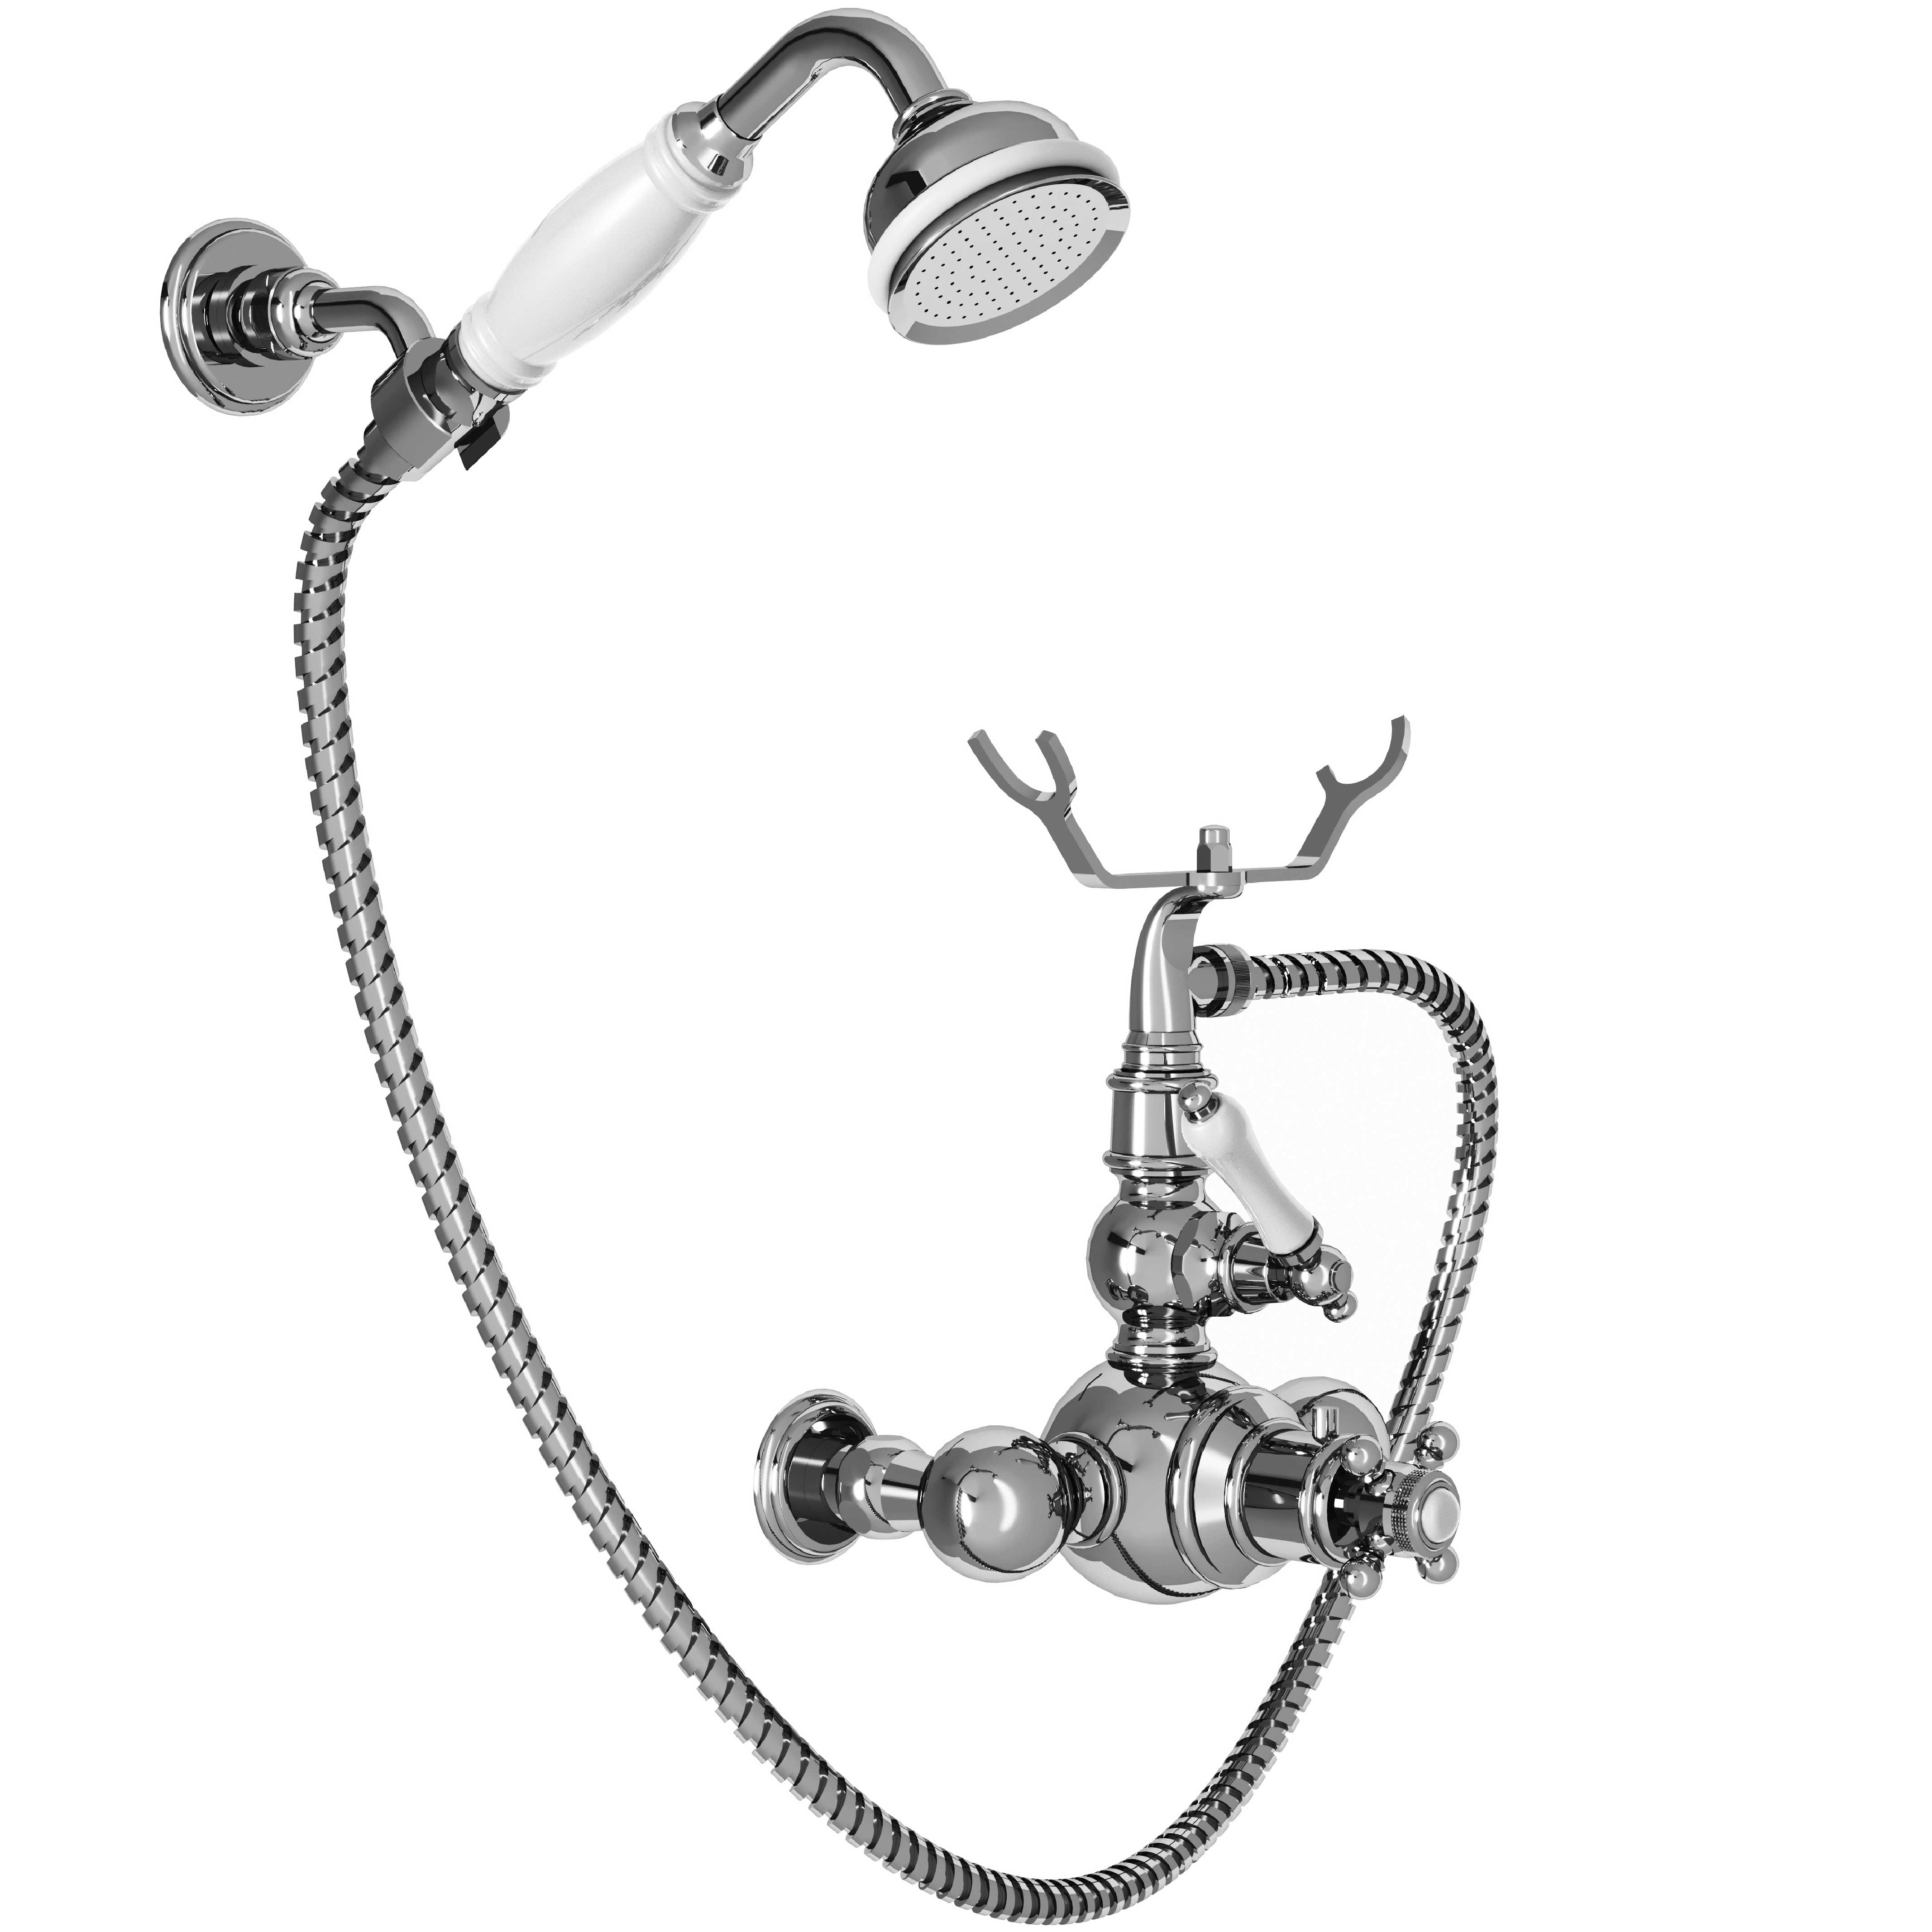 M04-2201T Thermostatic shower mixer with hook